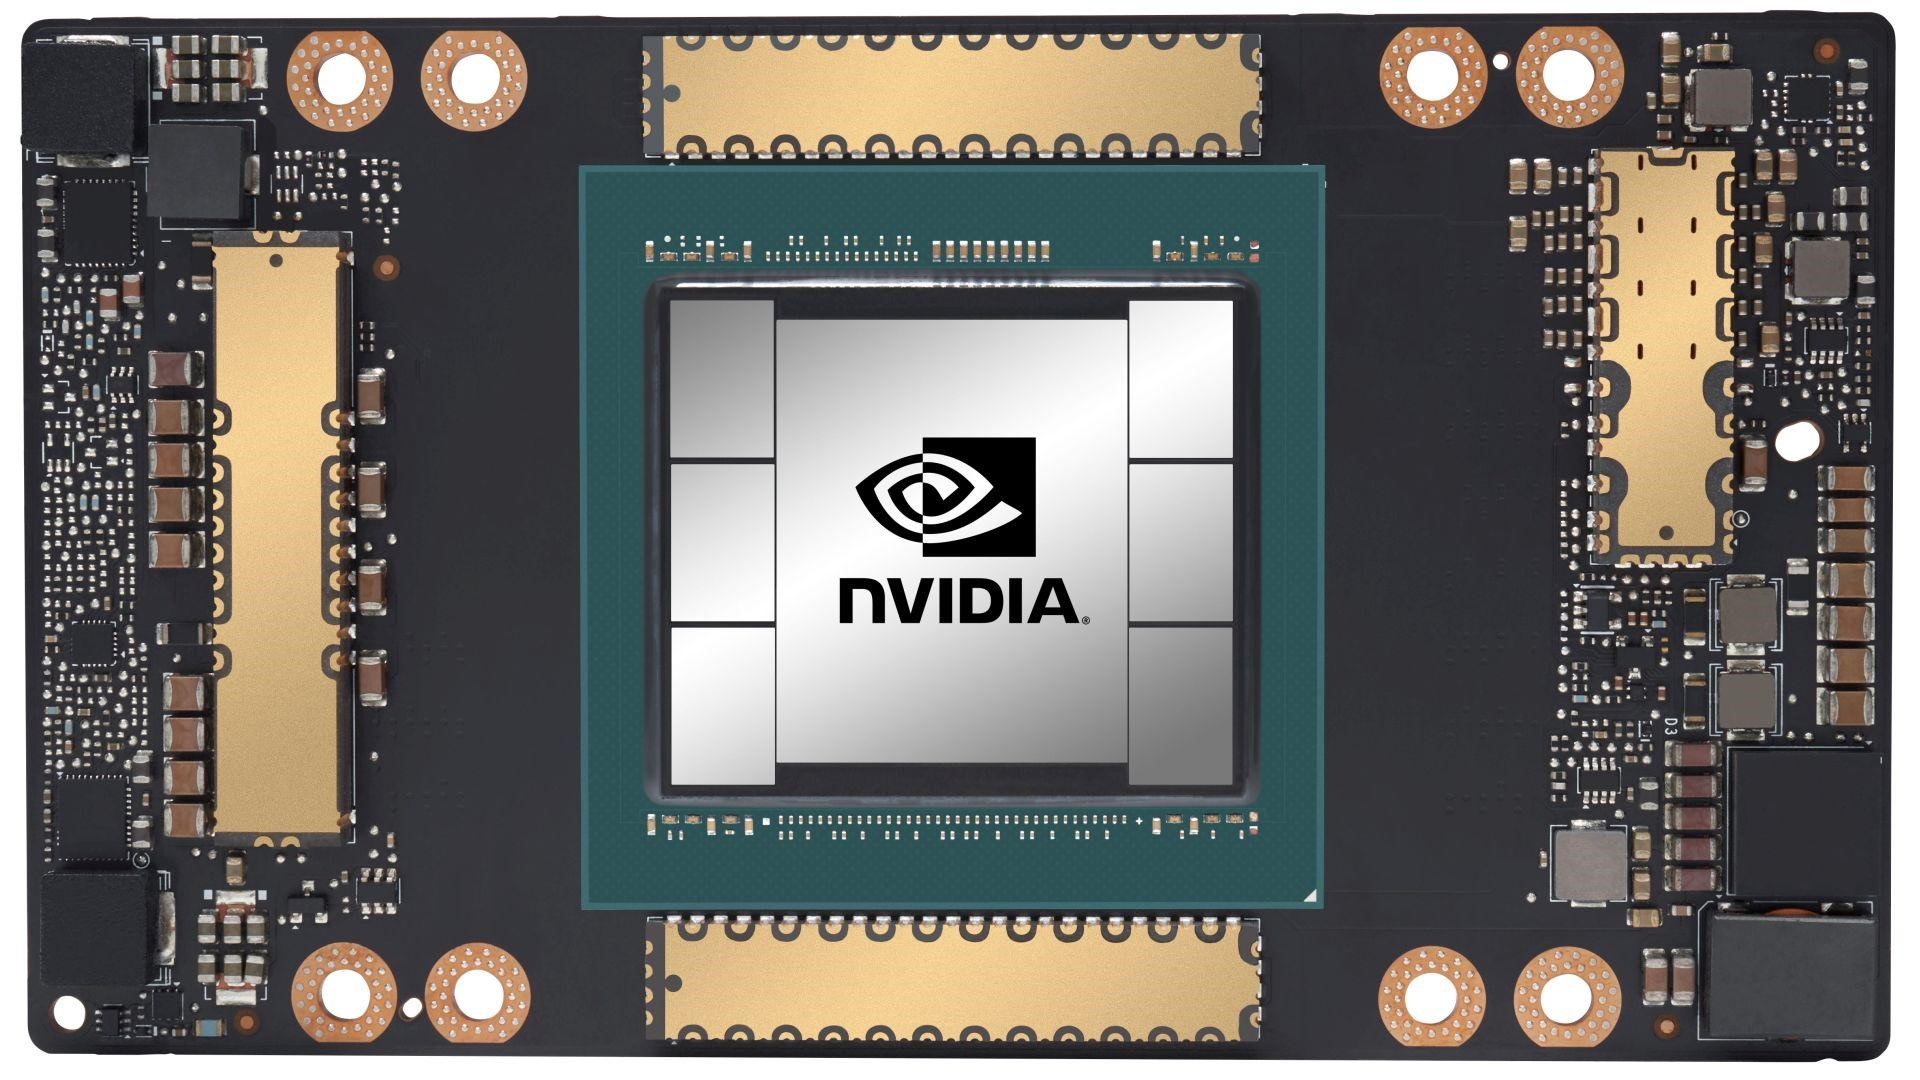 New leak says that the Nvidia GeForce RTX 3080 Ti will contain 12 GB GDDR6X VRAM and 10 240 CUDA cores